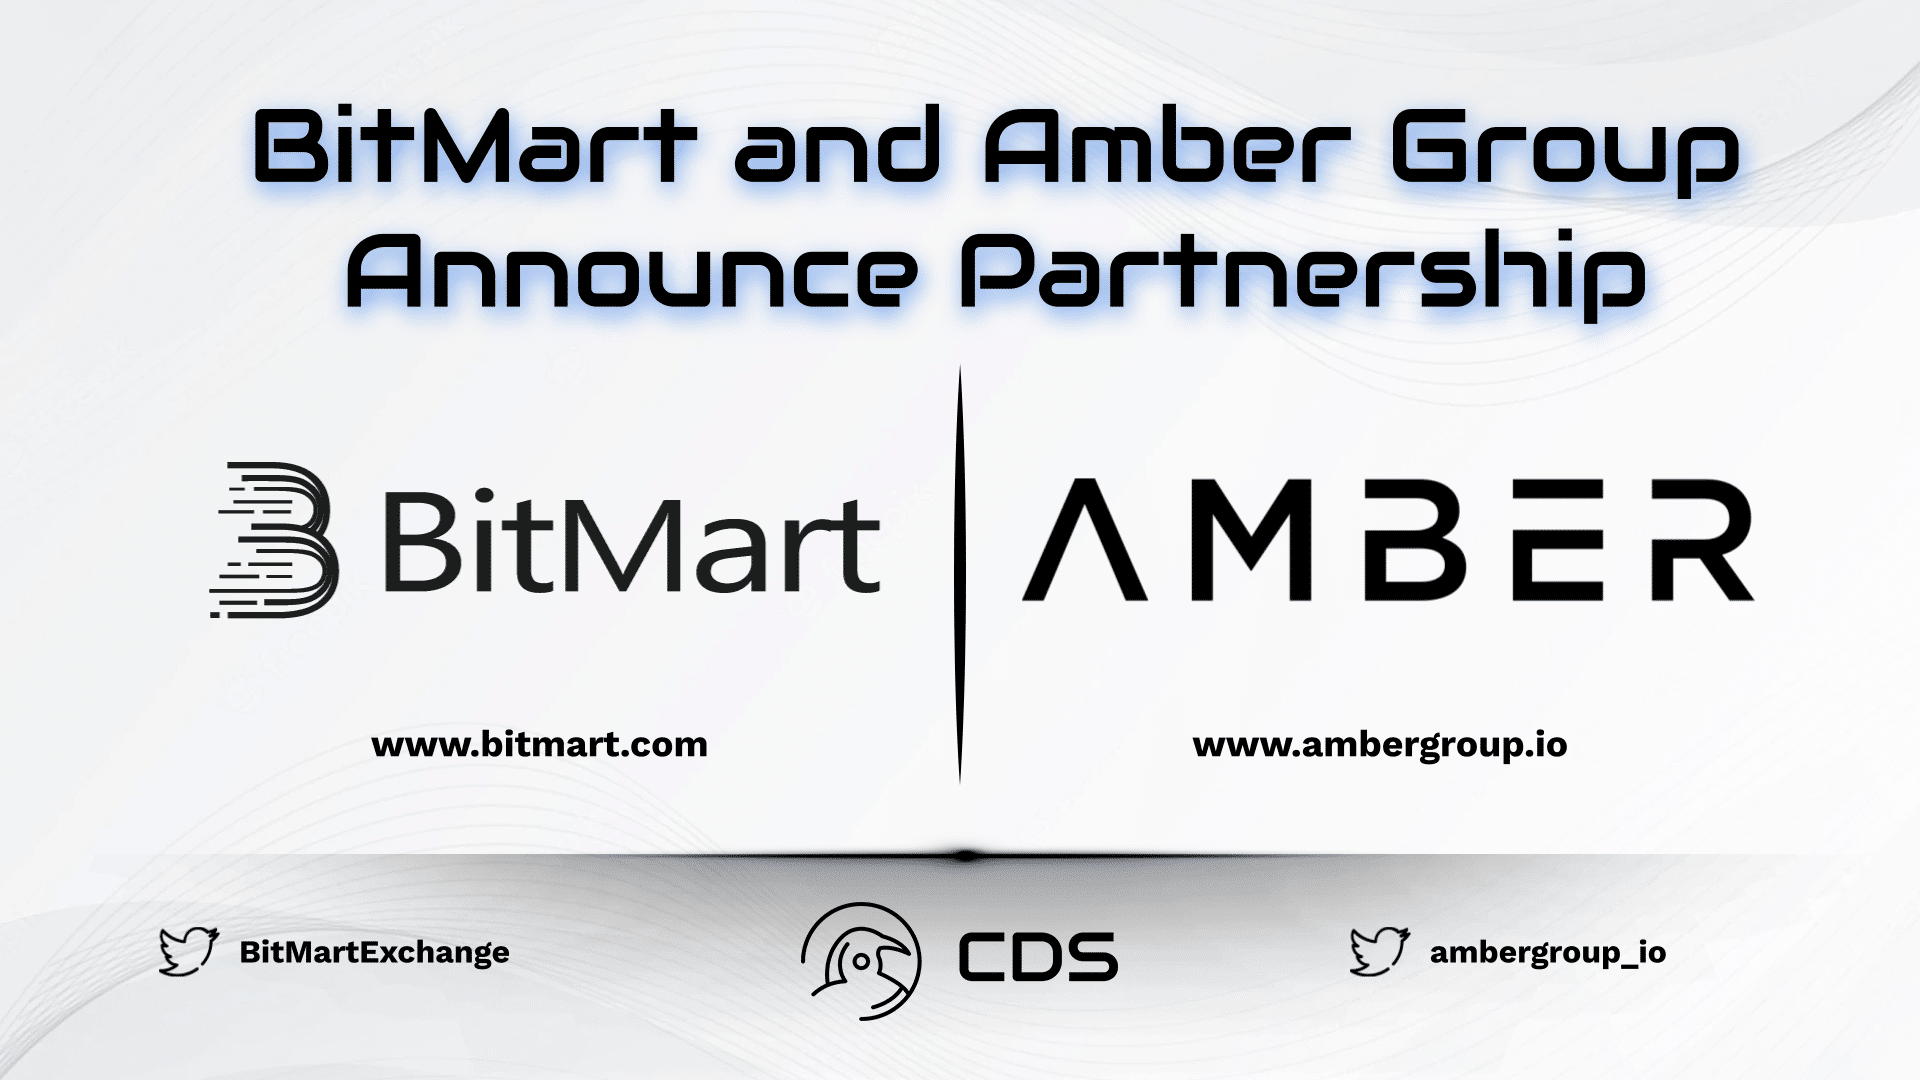 BitMart and Amber Group Announce Partnership